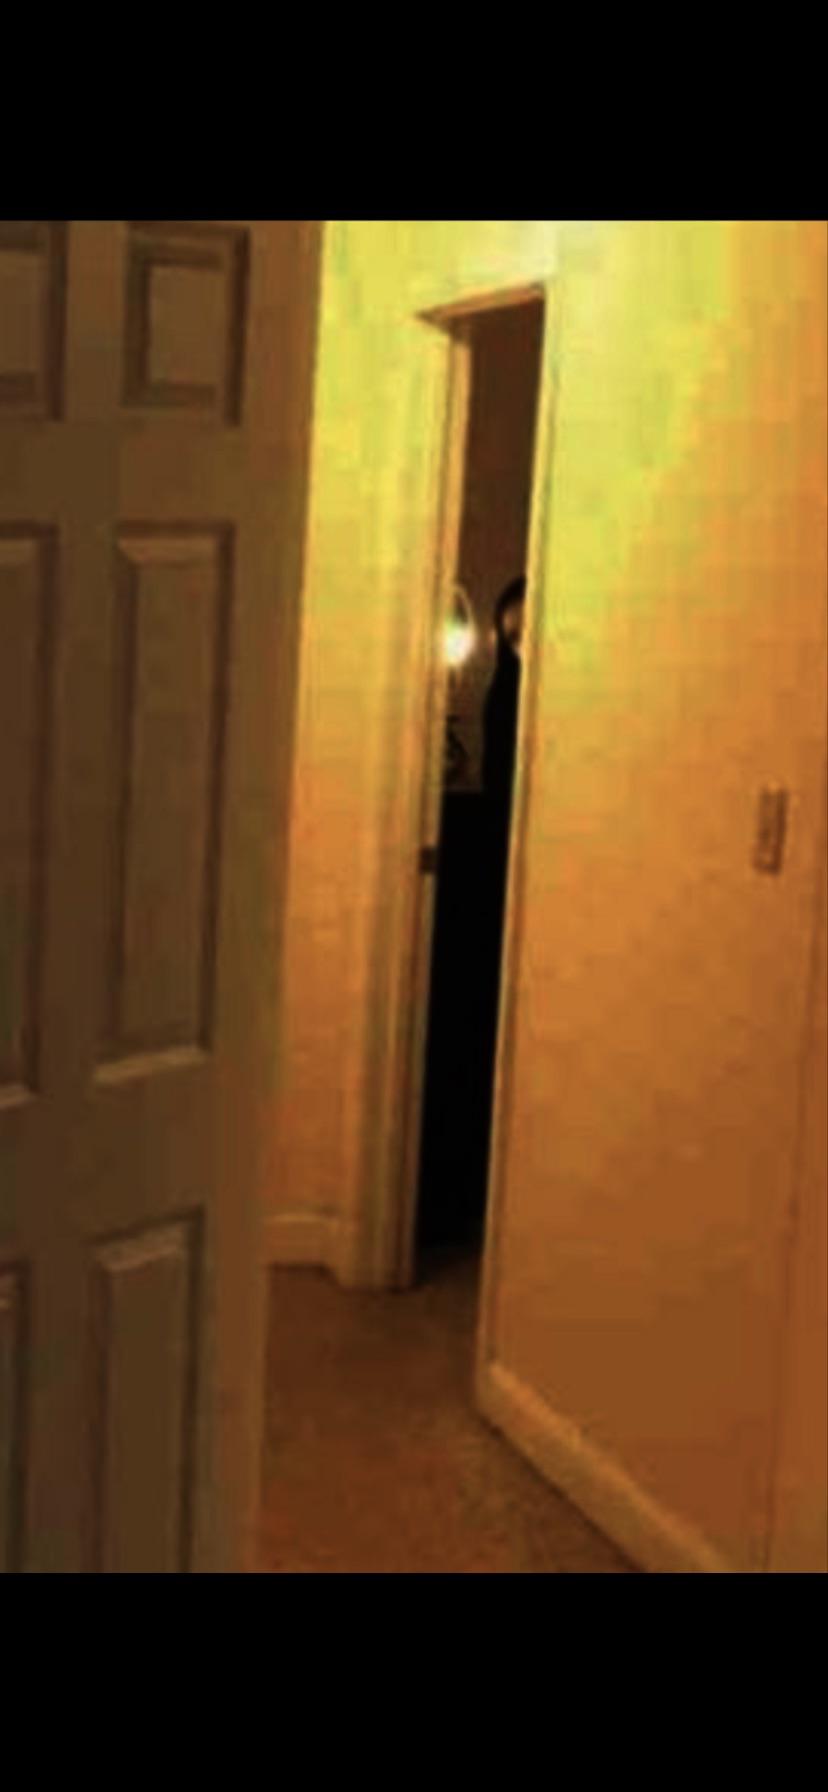 ghost photos - real ghosts - room